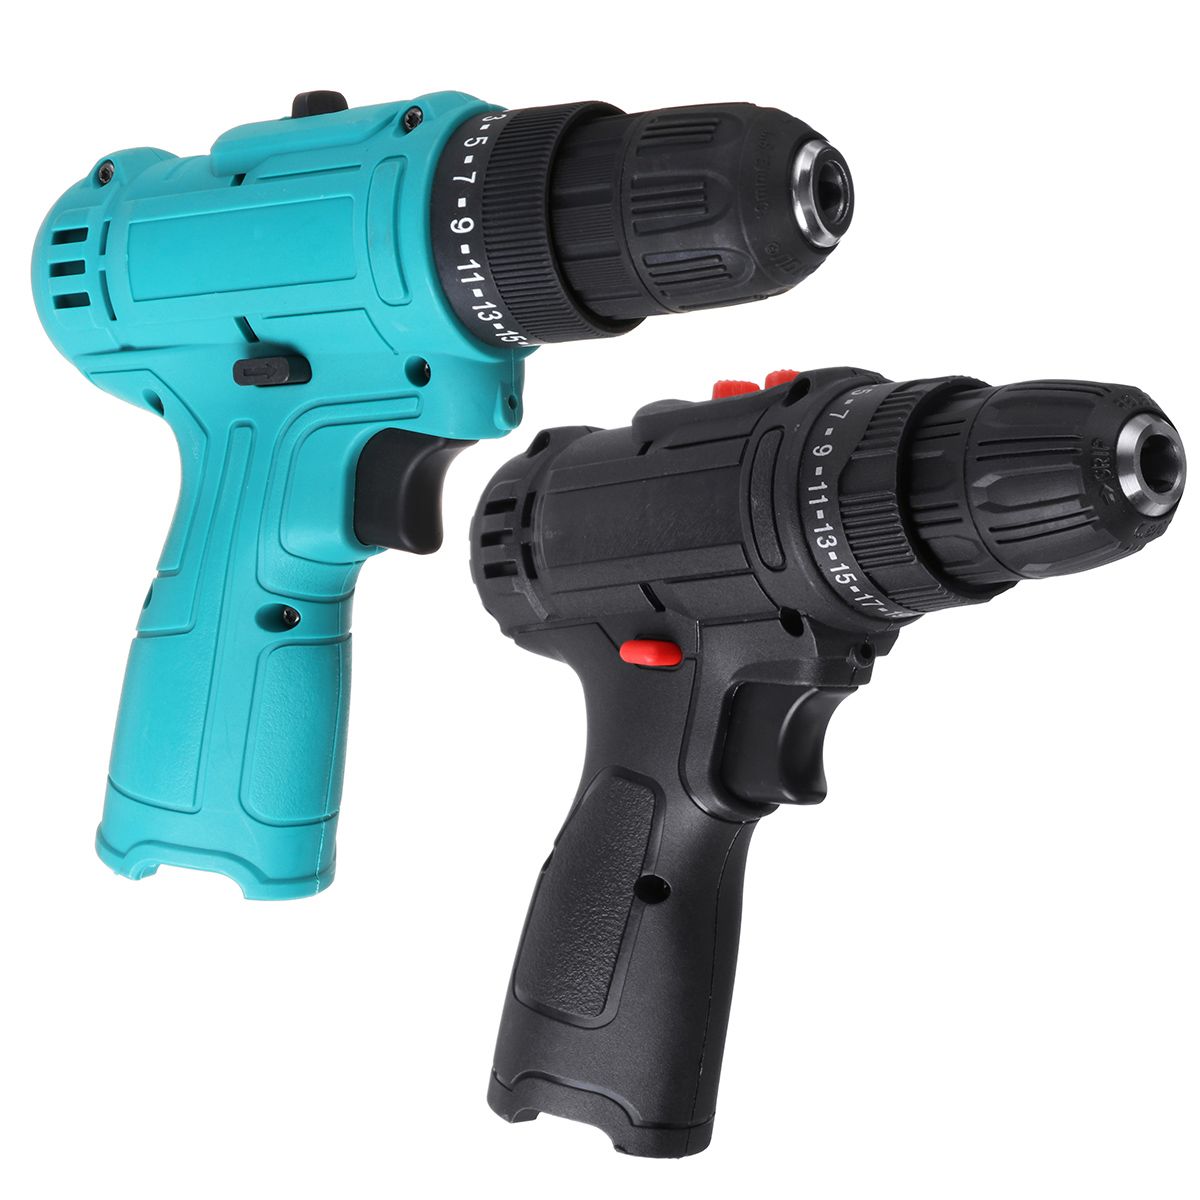 12V-25-Torque-2-Speed-Cordless-Electric-Drill-Rechargeable-Screwdriver-Without-Battery-1745656